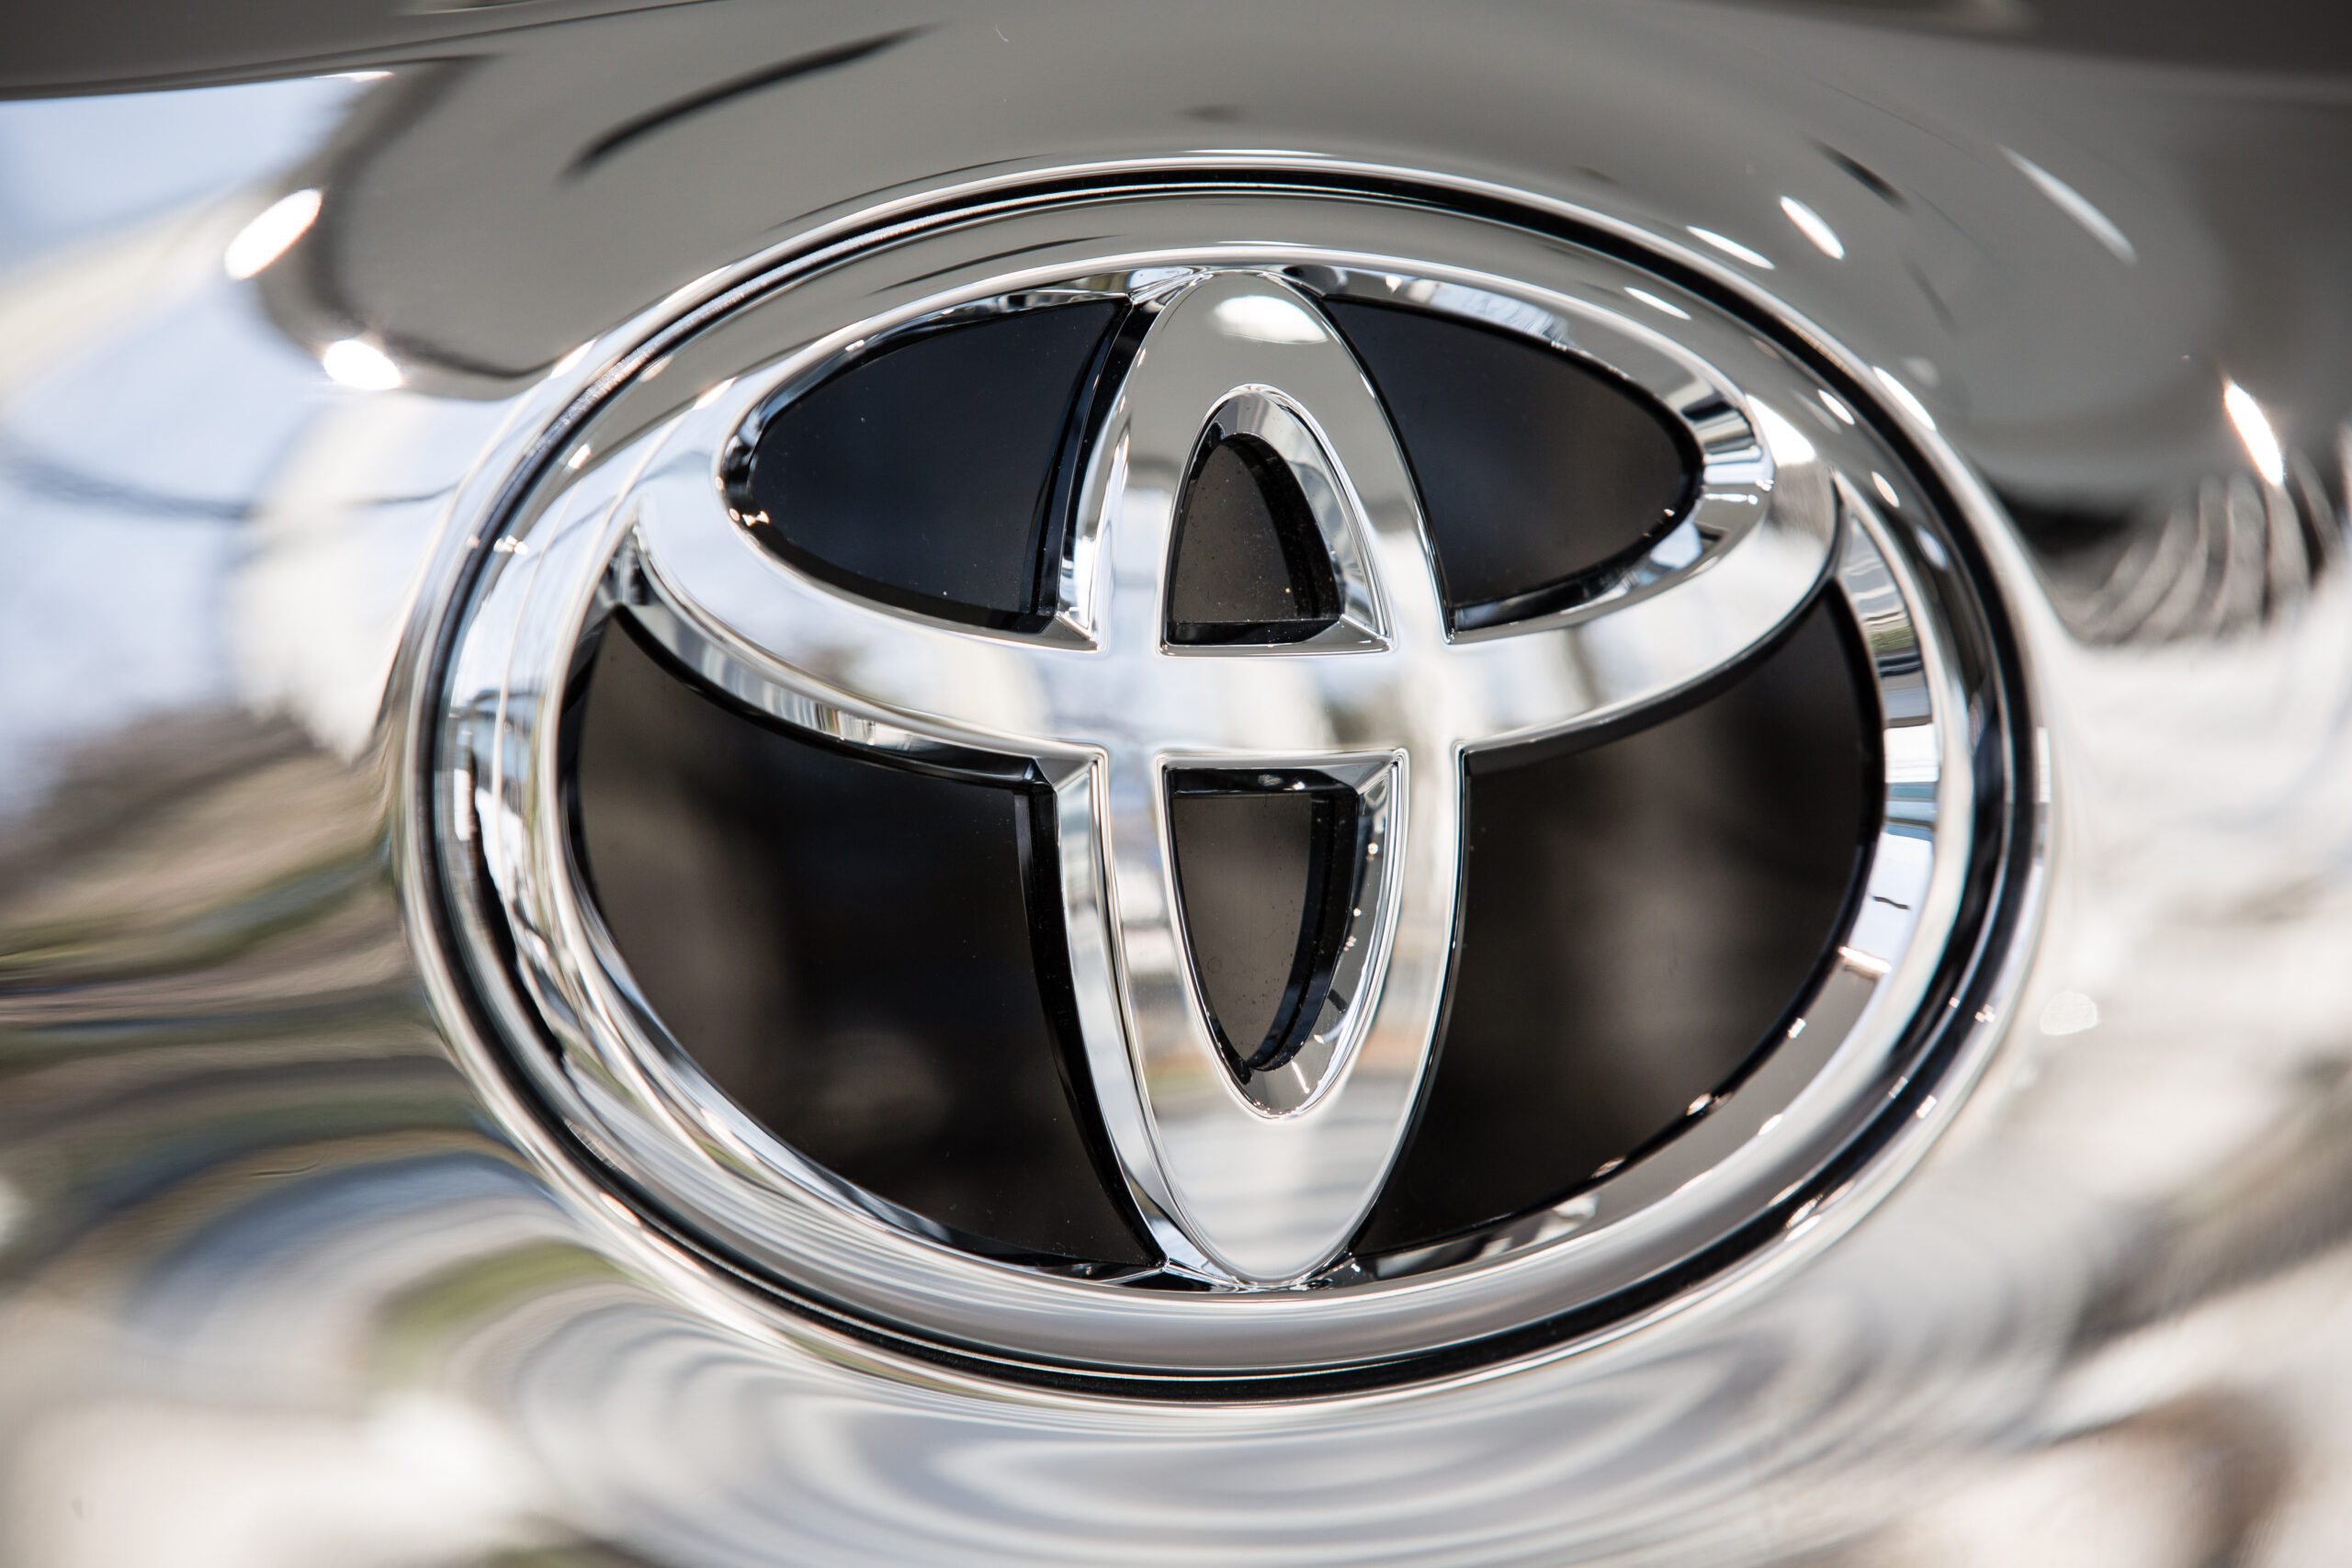 Toyota plants start again after 6-day parts shortage